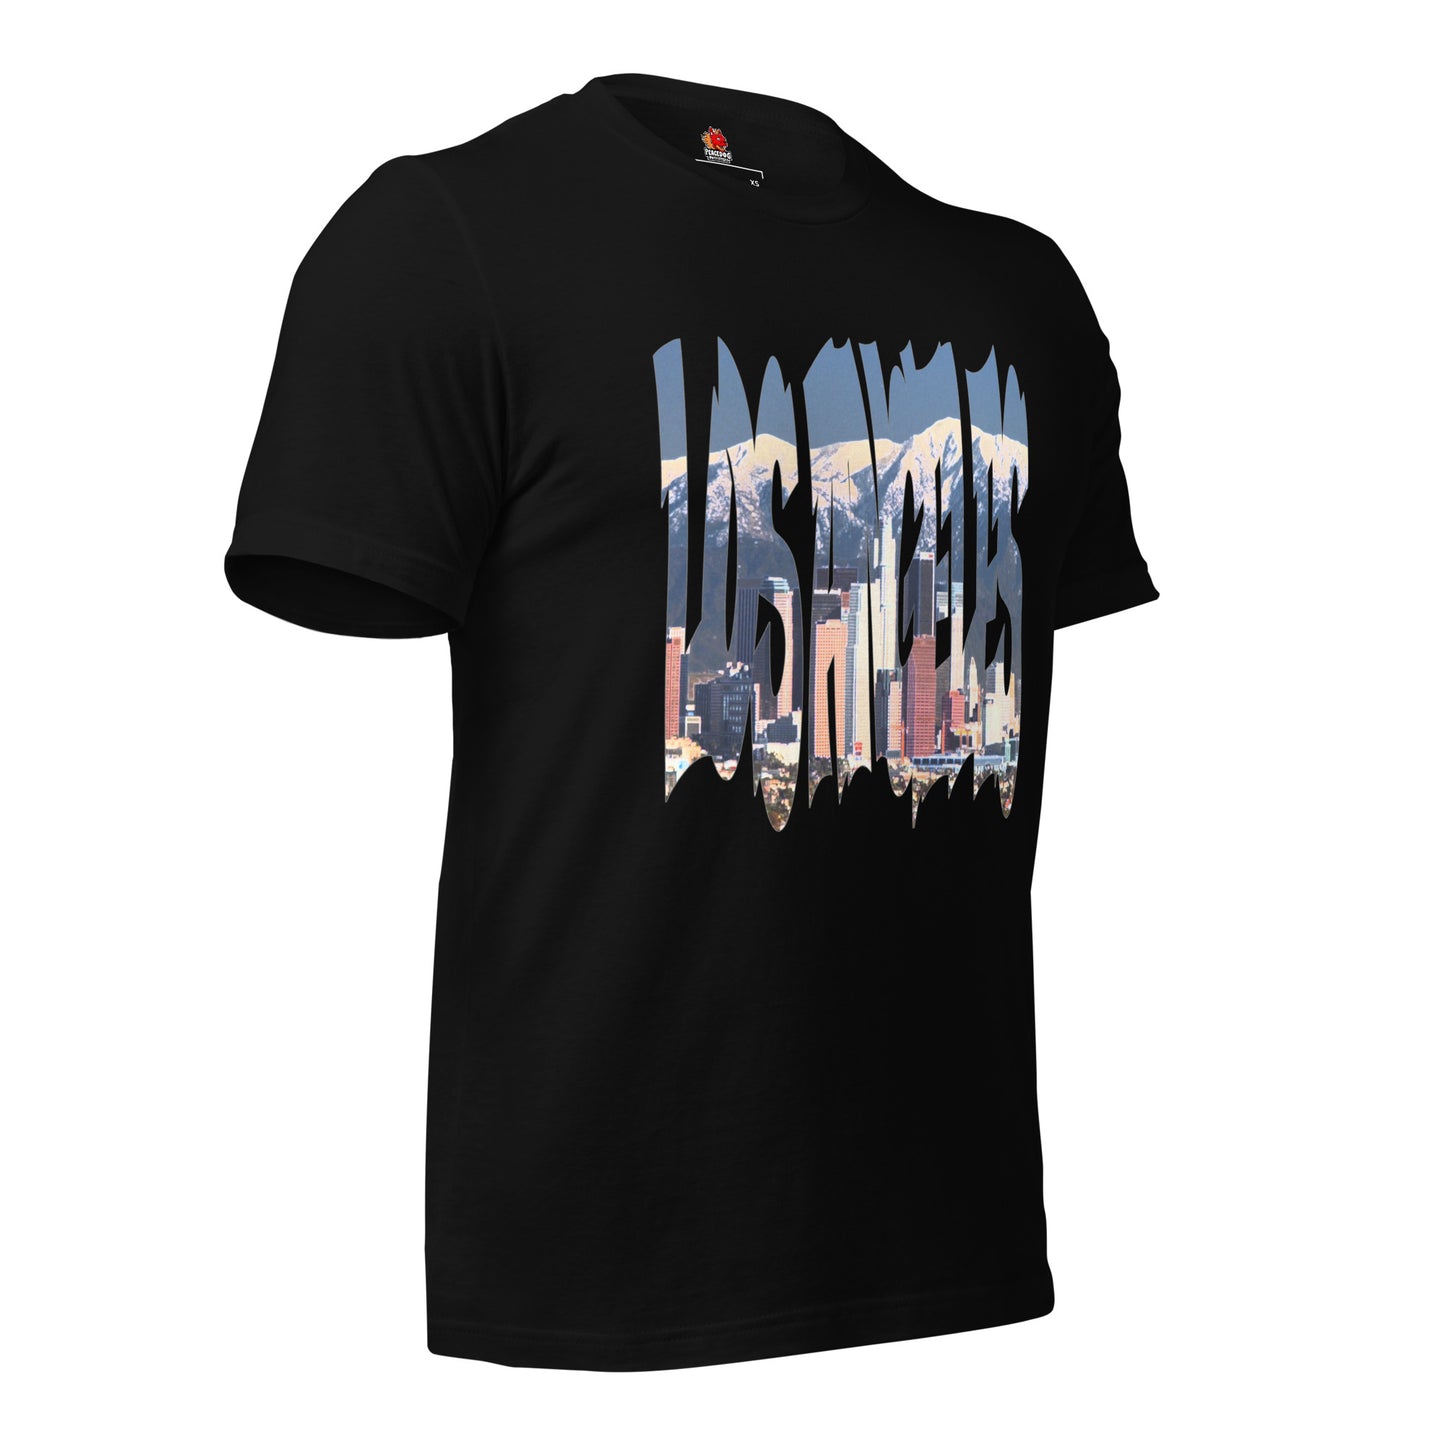 Los Angeles Skyline Typography Front Print T-shirt